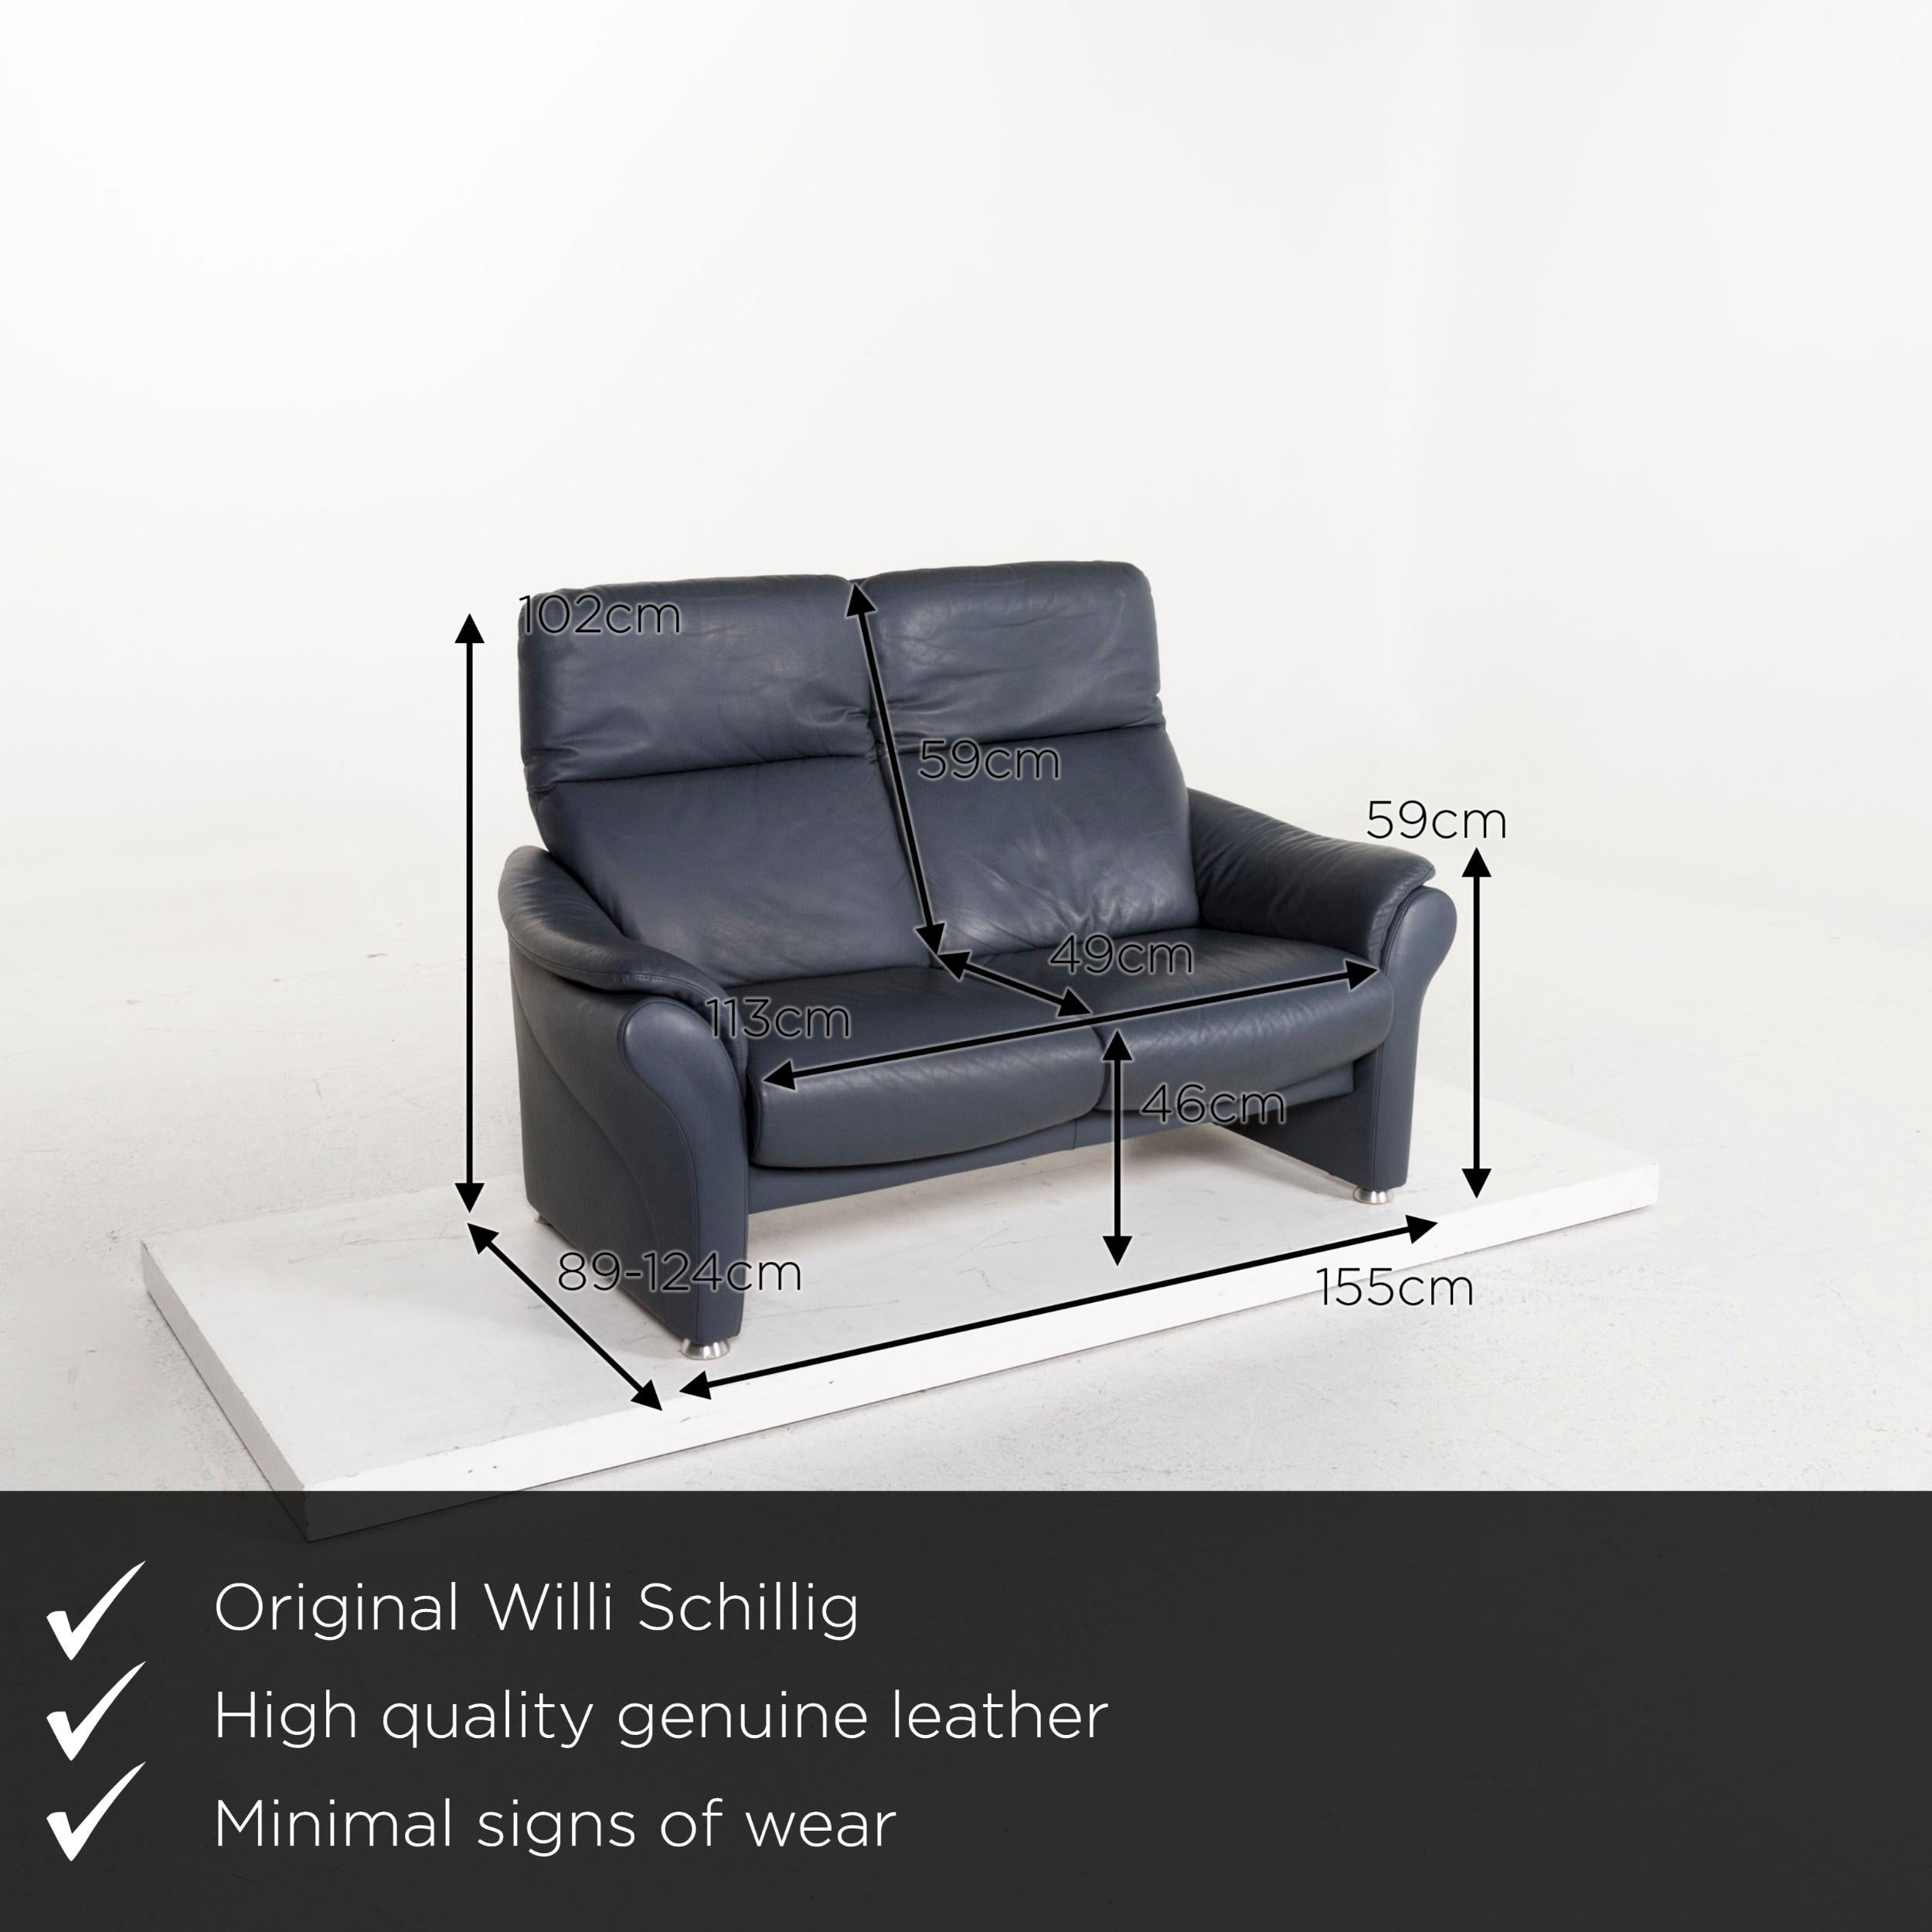 We present to you a Willi Schillig Ergoline leather sofa blue two-seat function relax function.
 

 Product measurements in centimeters:
 

Depth 89
Width 155
Height 102
Seat height 46
Rest height 59
Seat depth 49
Seat width 113
Back